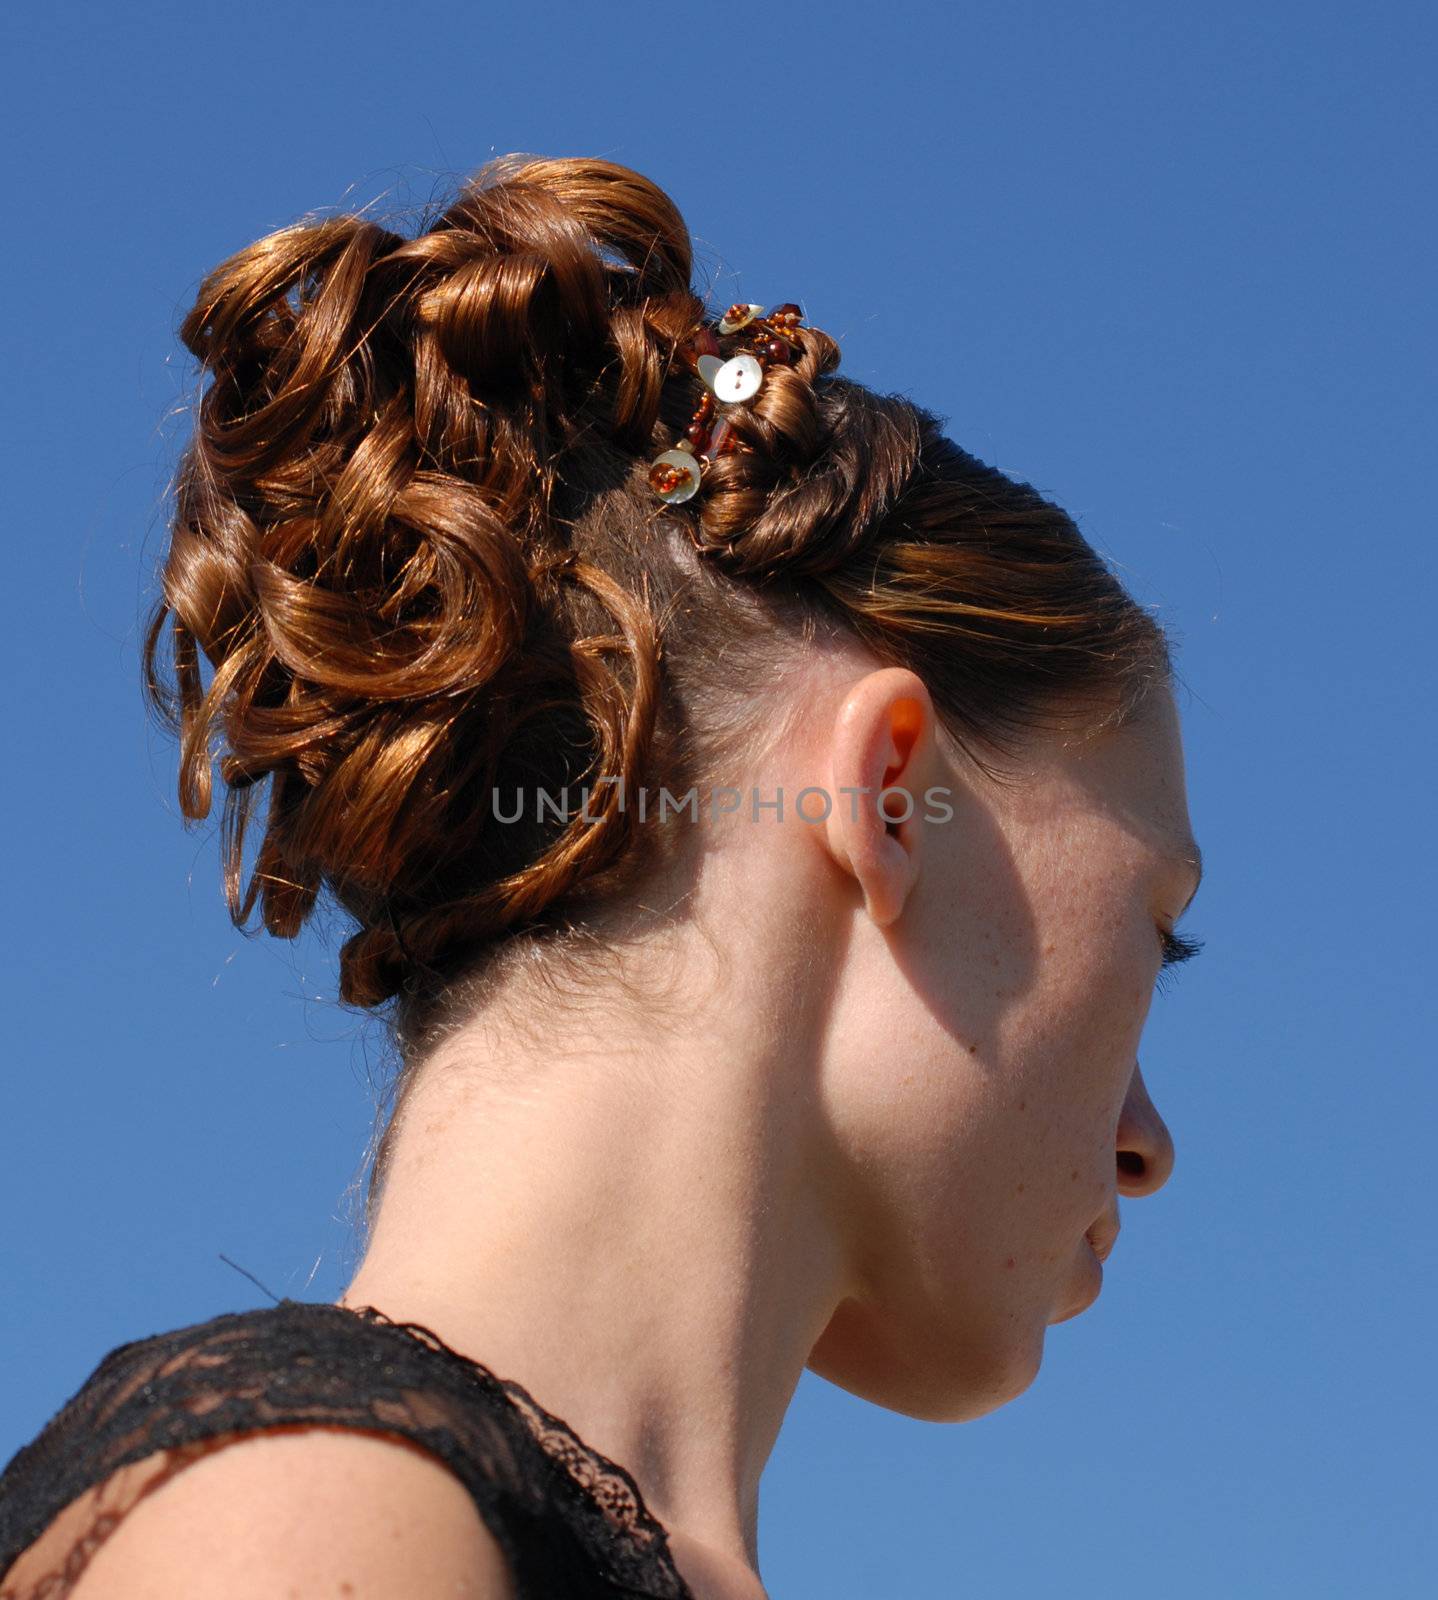 young woman and her beautiful hairstyle for ceremony beauty, style, fashion, salon, woman, hairdresser, curls, haircut, comb, styled, cosmetic, curl, curlers, girl, curled, rolled, female, long, hair-do, to, hair, teen, teenager, beauty, beautiful, brunette, brown, wedding, ceremony, marriage, love, couple, romance, happy,  bride, happiness, dress, wife, family, young, just, person, joy, 